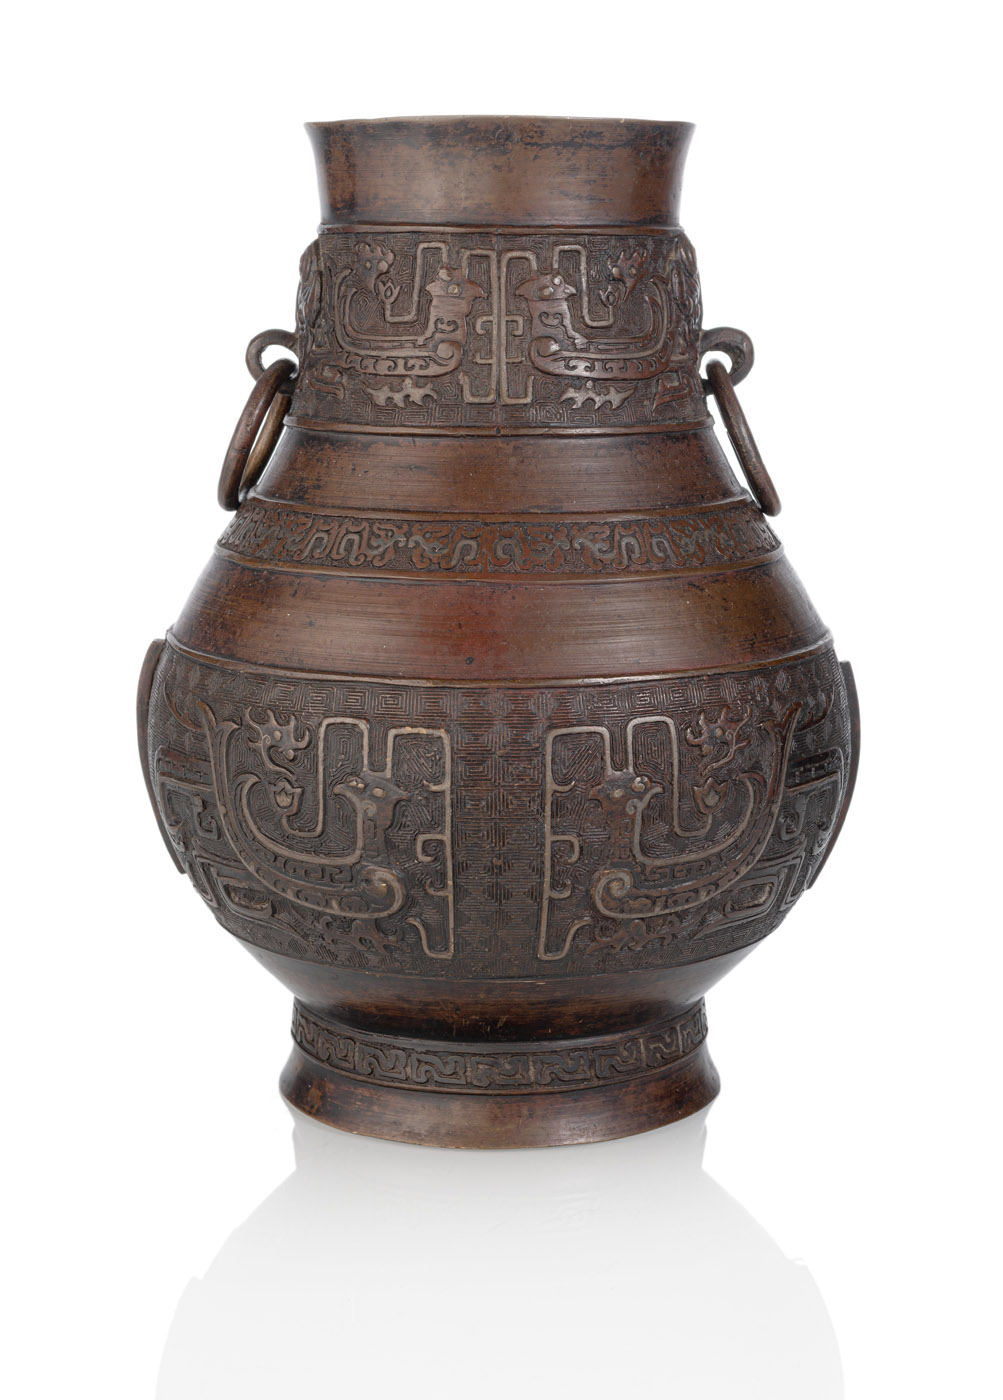 <b>A SILVER-INLAID HU-SHAPED BRONZE VASE IN ARCHAIC STYLE</b>